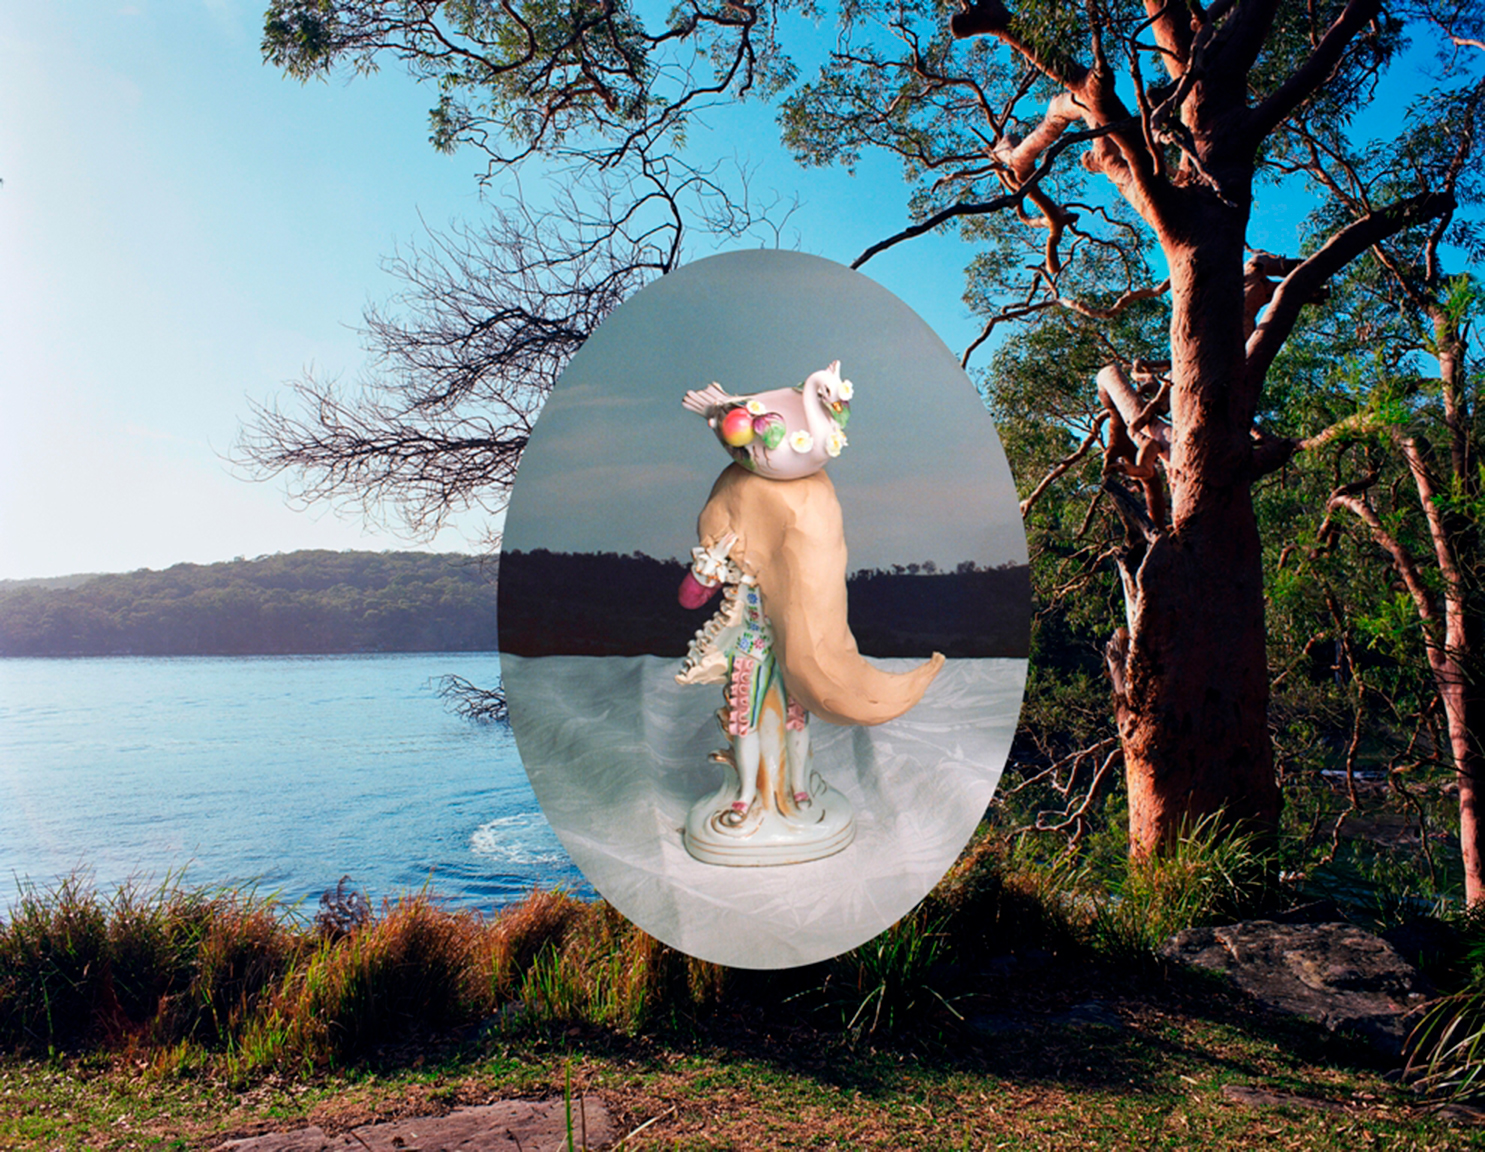 A photograph of a lake with an oval photograph of a ceramic figure placed in the centre.